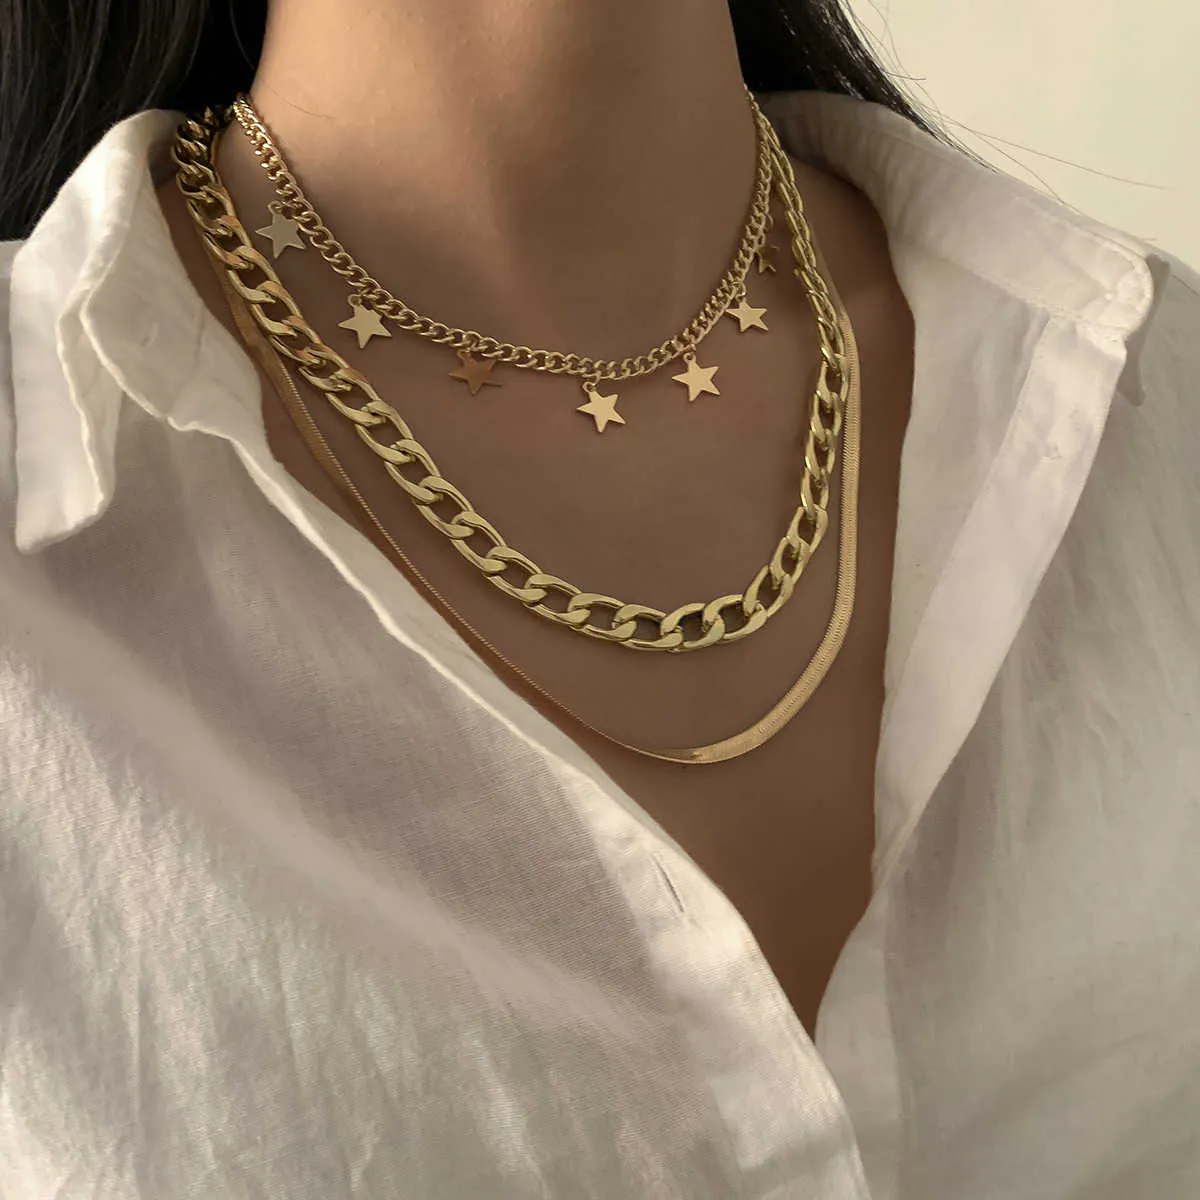 Cuban Chain Gold Silver Color Star Choker Necklaces with Snake Chain for Women Girls Jewelry Q0809